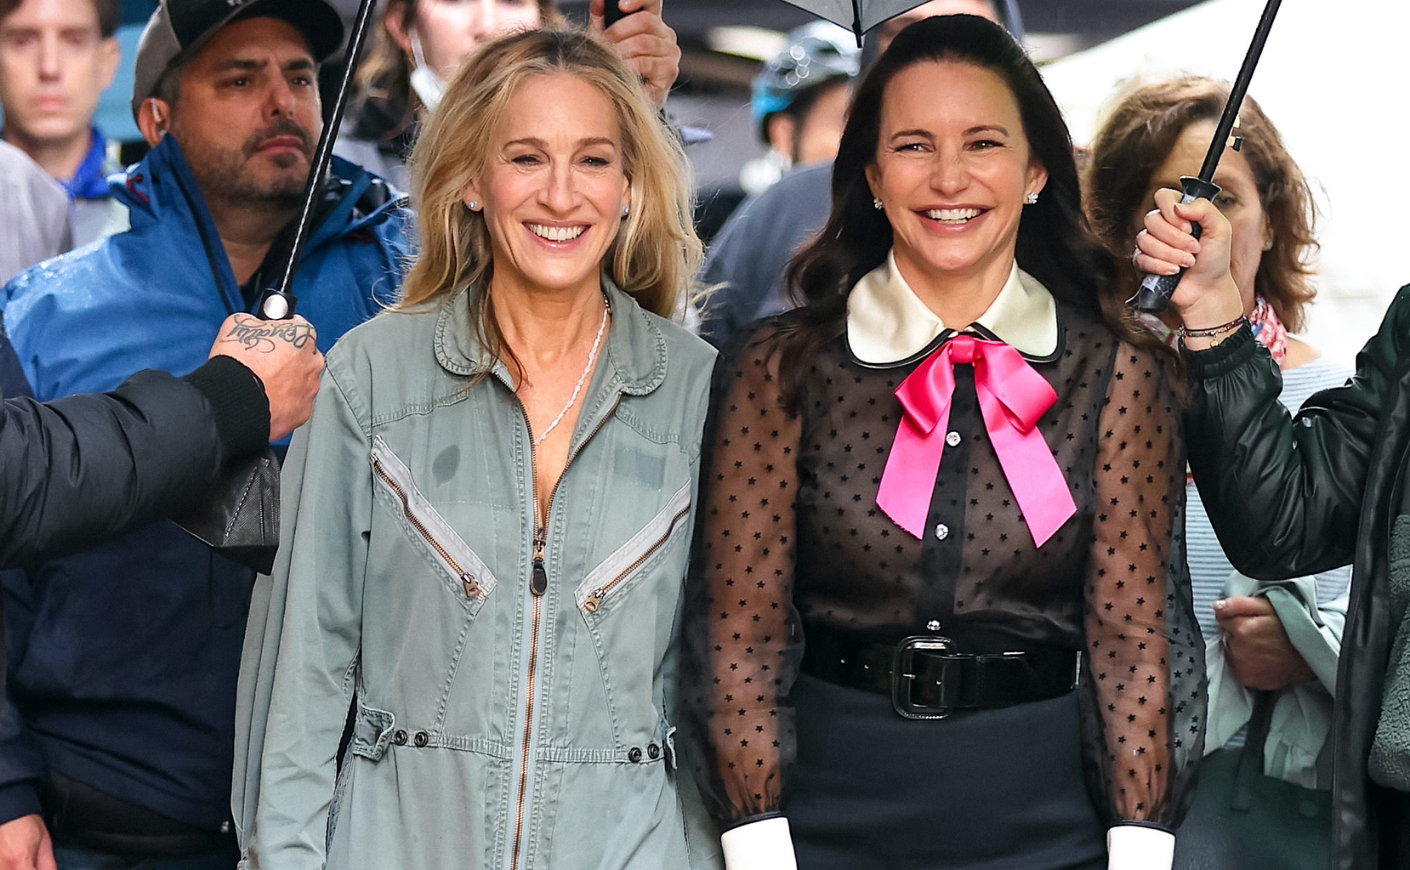 Sarah Jessica Parker and Kristin Davis on the set of "And Just Like That"